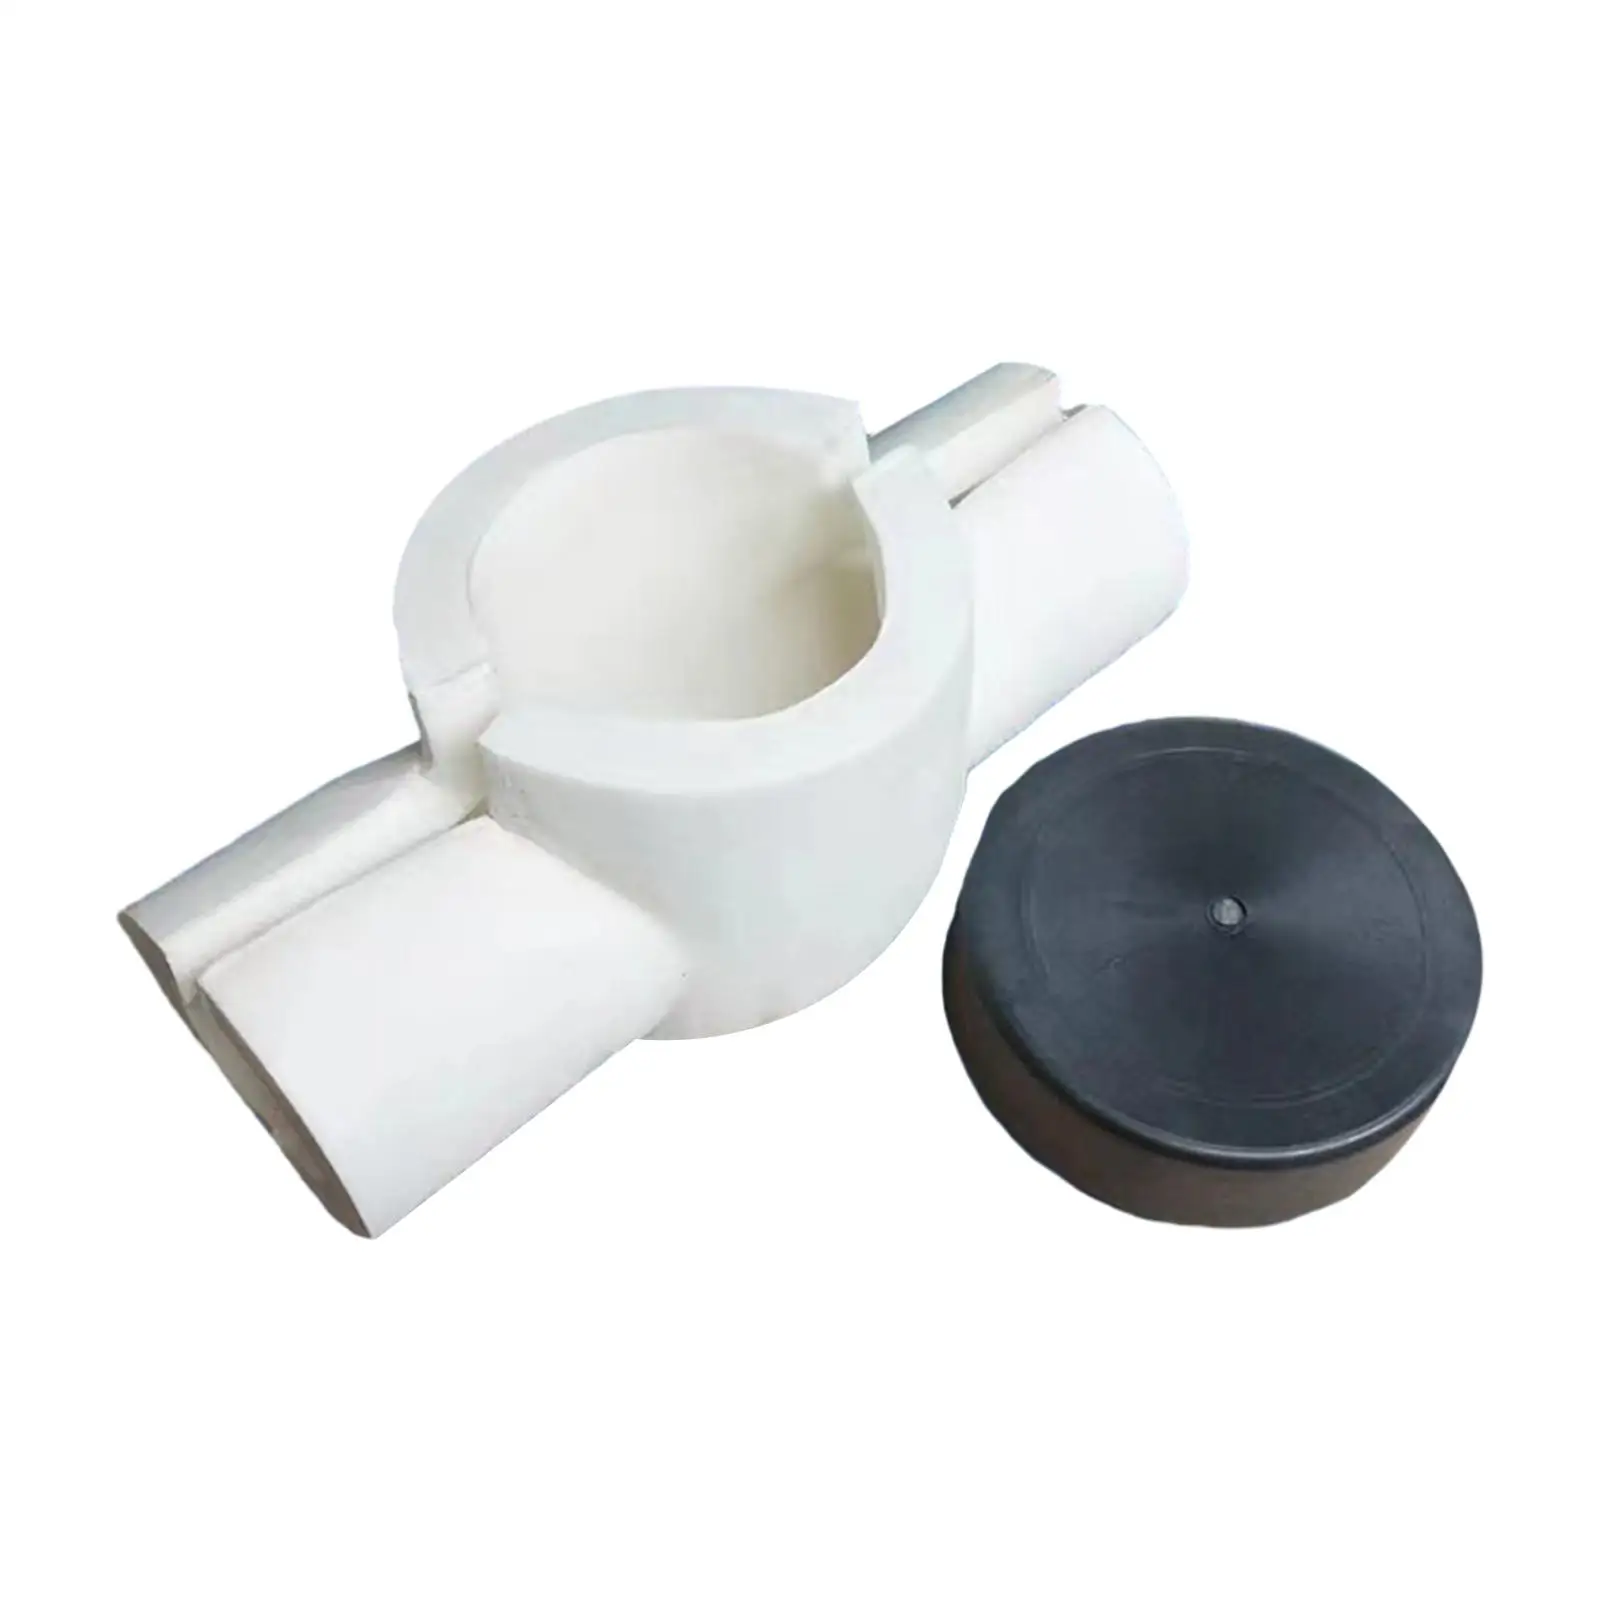 Foam Insulation Pipe Underground Water Meter Foam for Construction Industry Air Conditioners Hotels Office Pipe Insulation